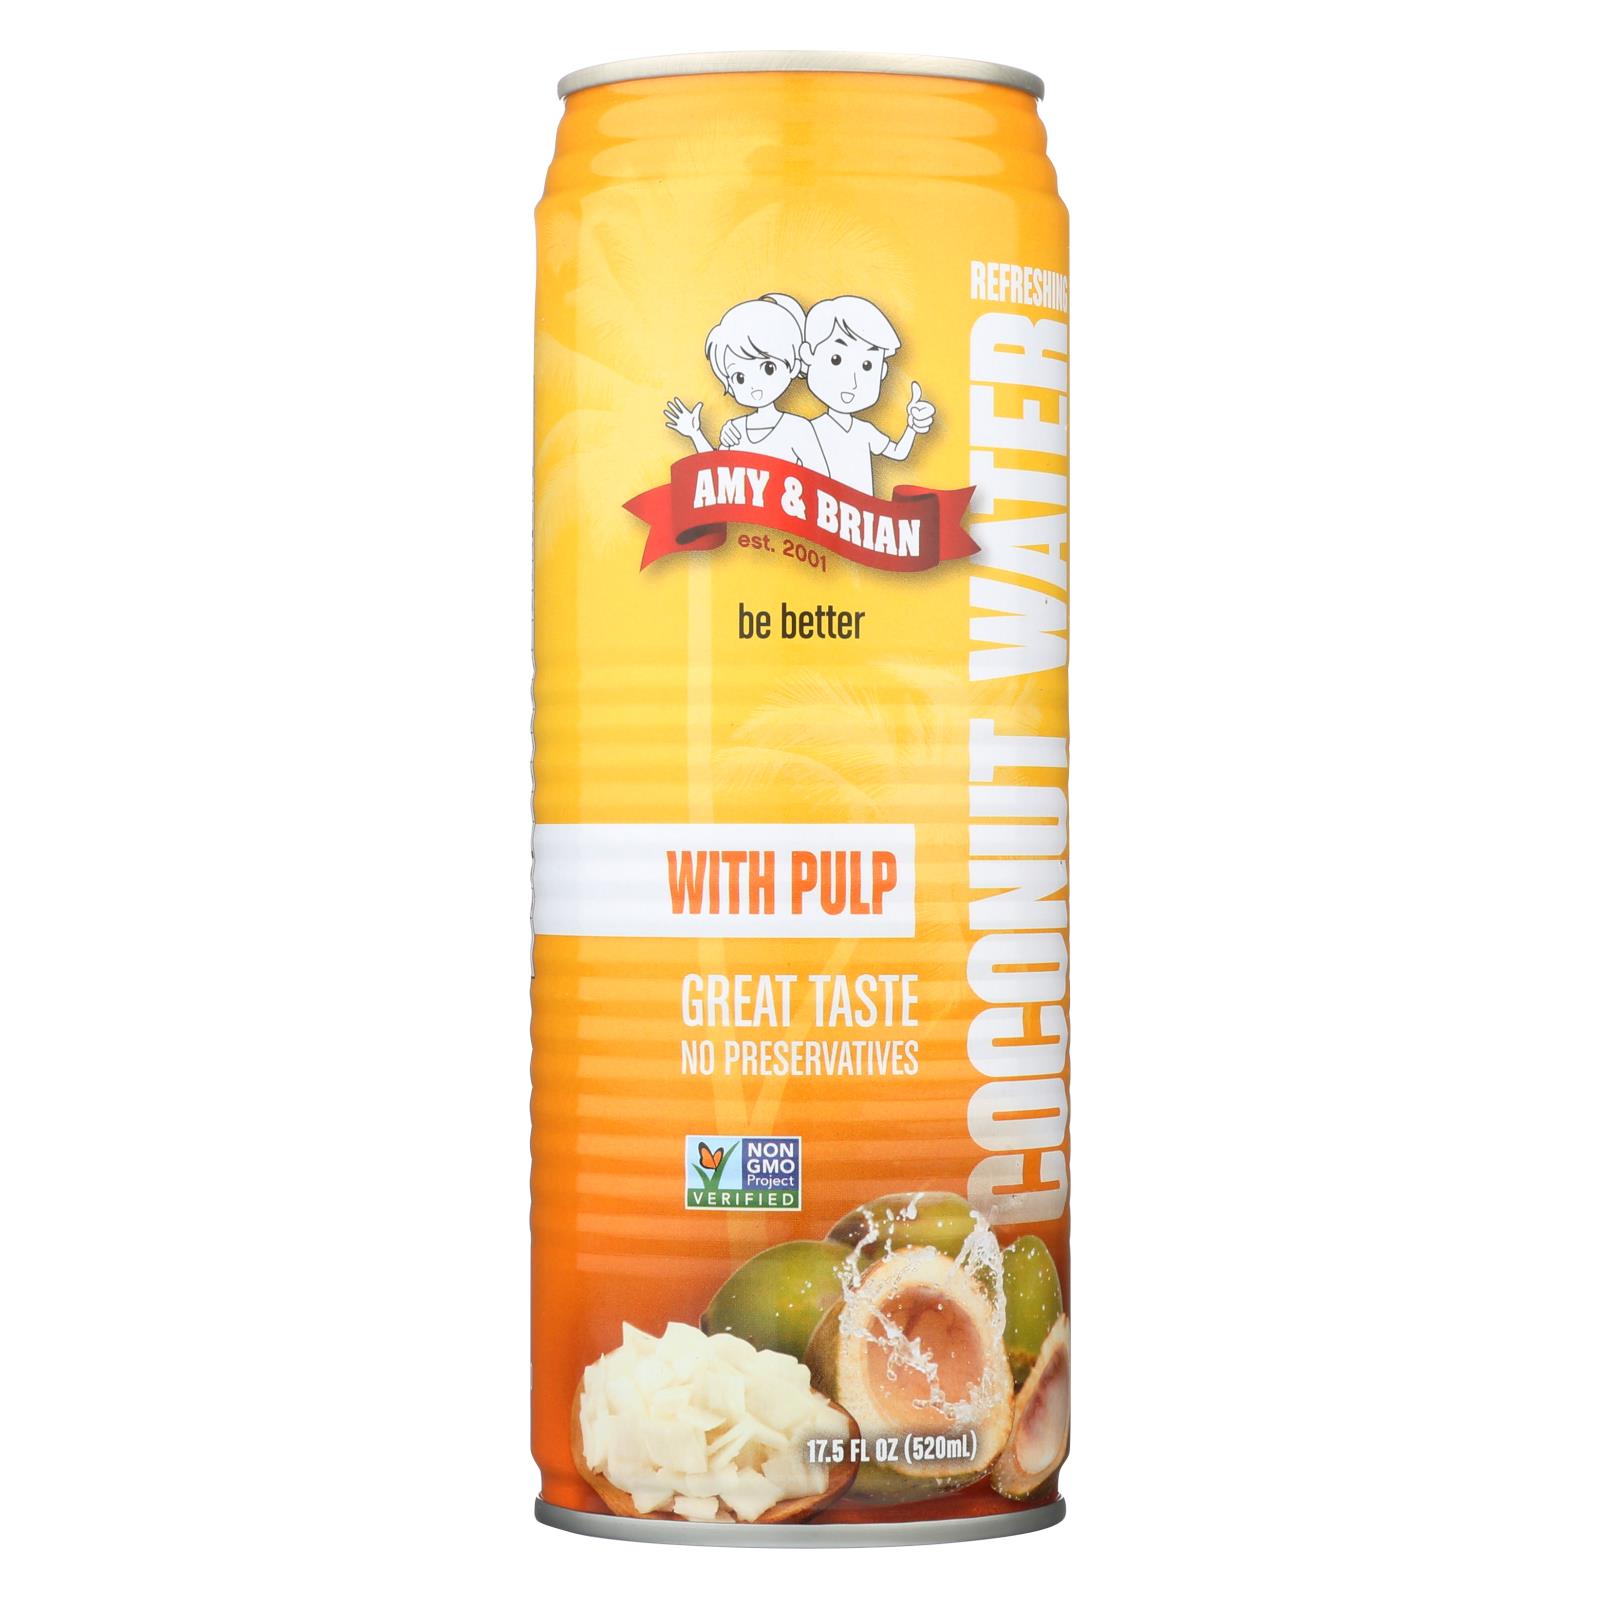 Amy and Brian - Coconut Water with Pulp - 12개 묶음상품 - 17.5 fl oz.